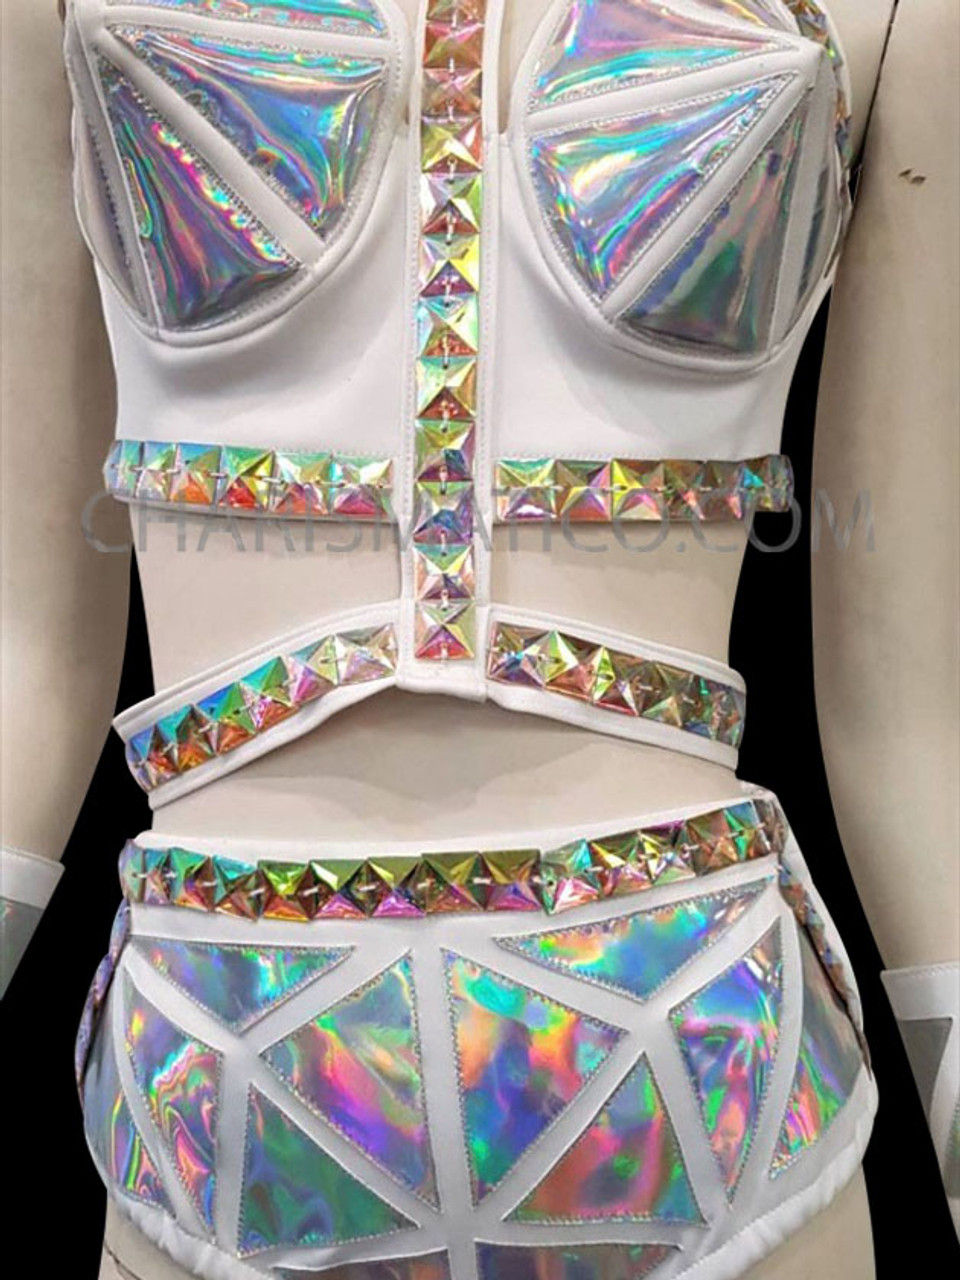 Silver Hologram Spiky Rave Festival Top With Hot-Pants